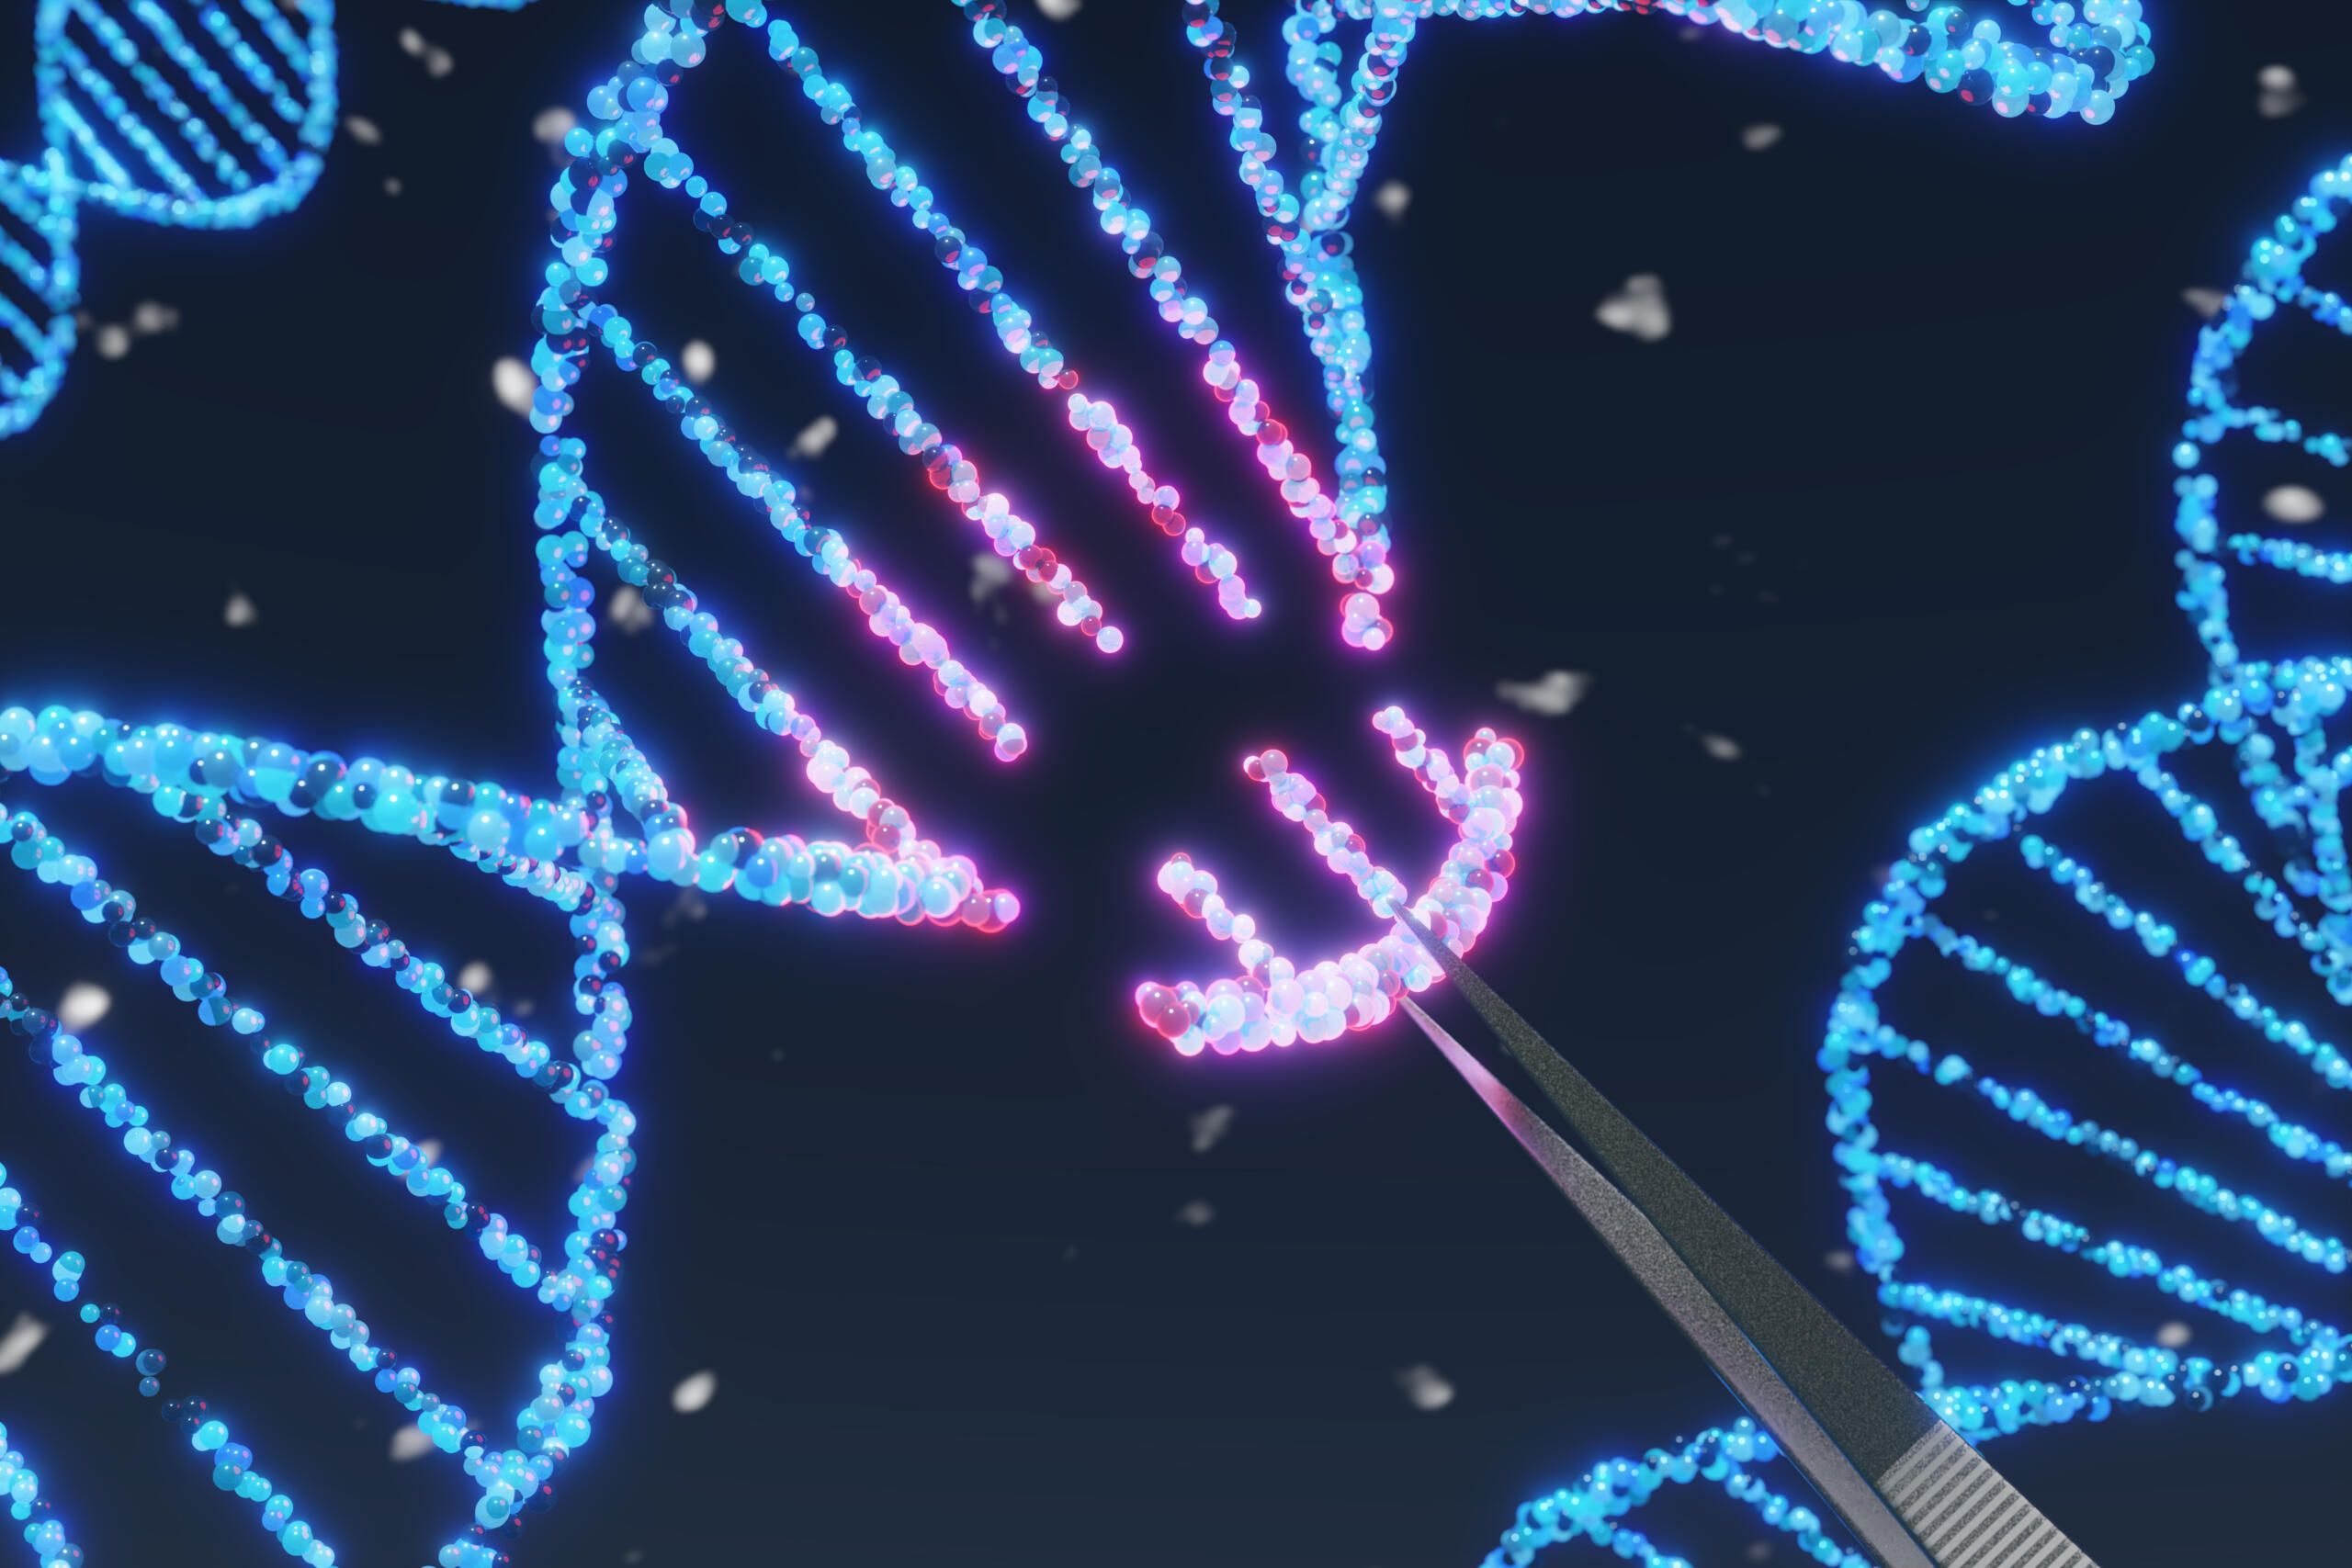 Glowing human DNA strands floating in mid air having a segment of the gene being hold by tweezers on dark background. Illustration of the concept of genetic engineering and gene therapy